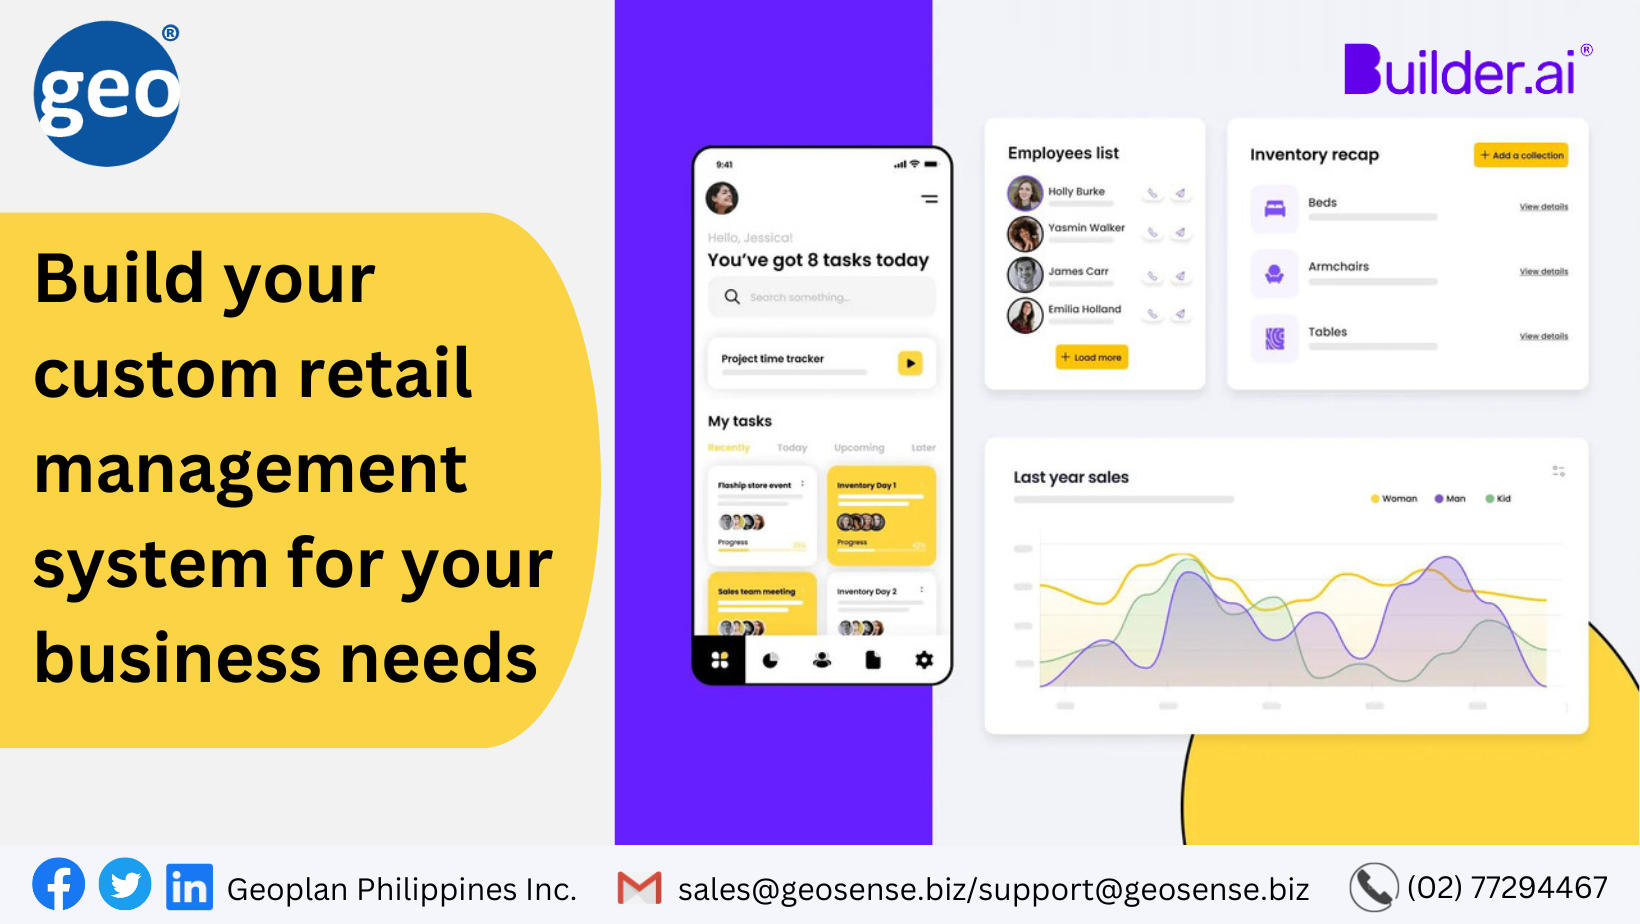 Builder.ai: Build your custom retail management system for your business needs.